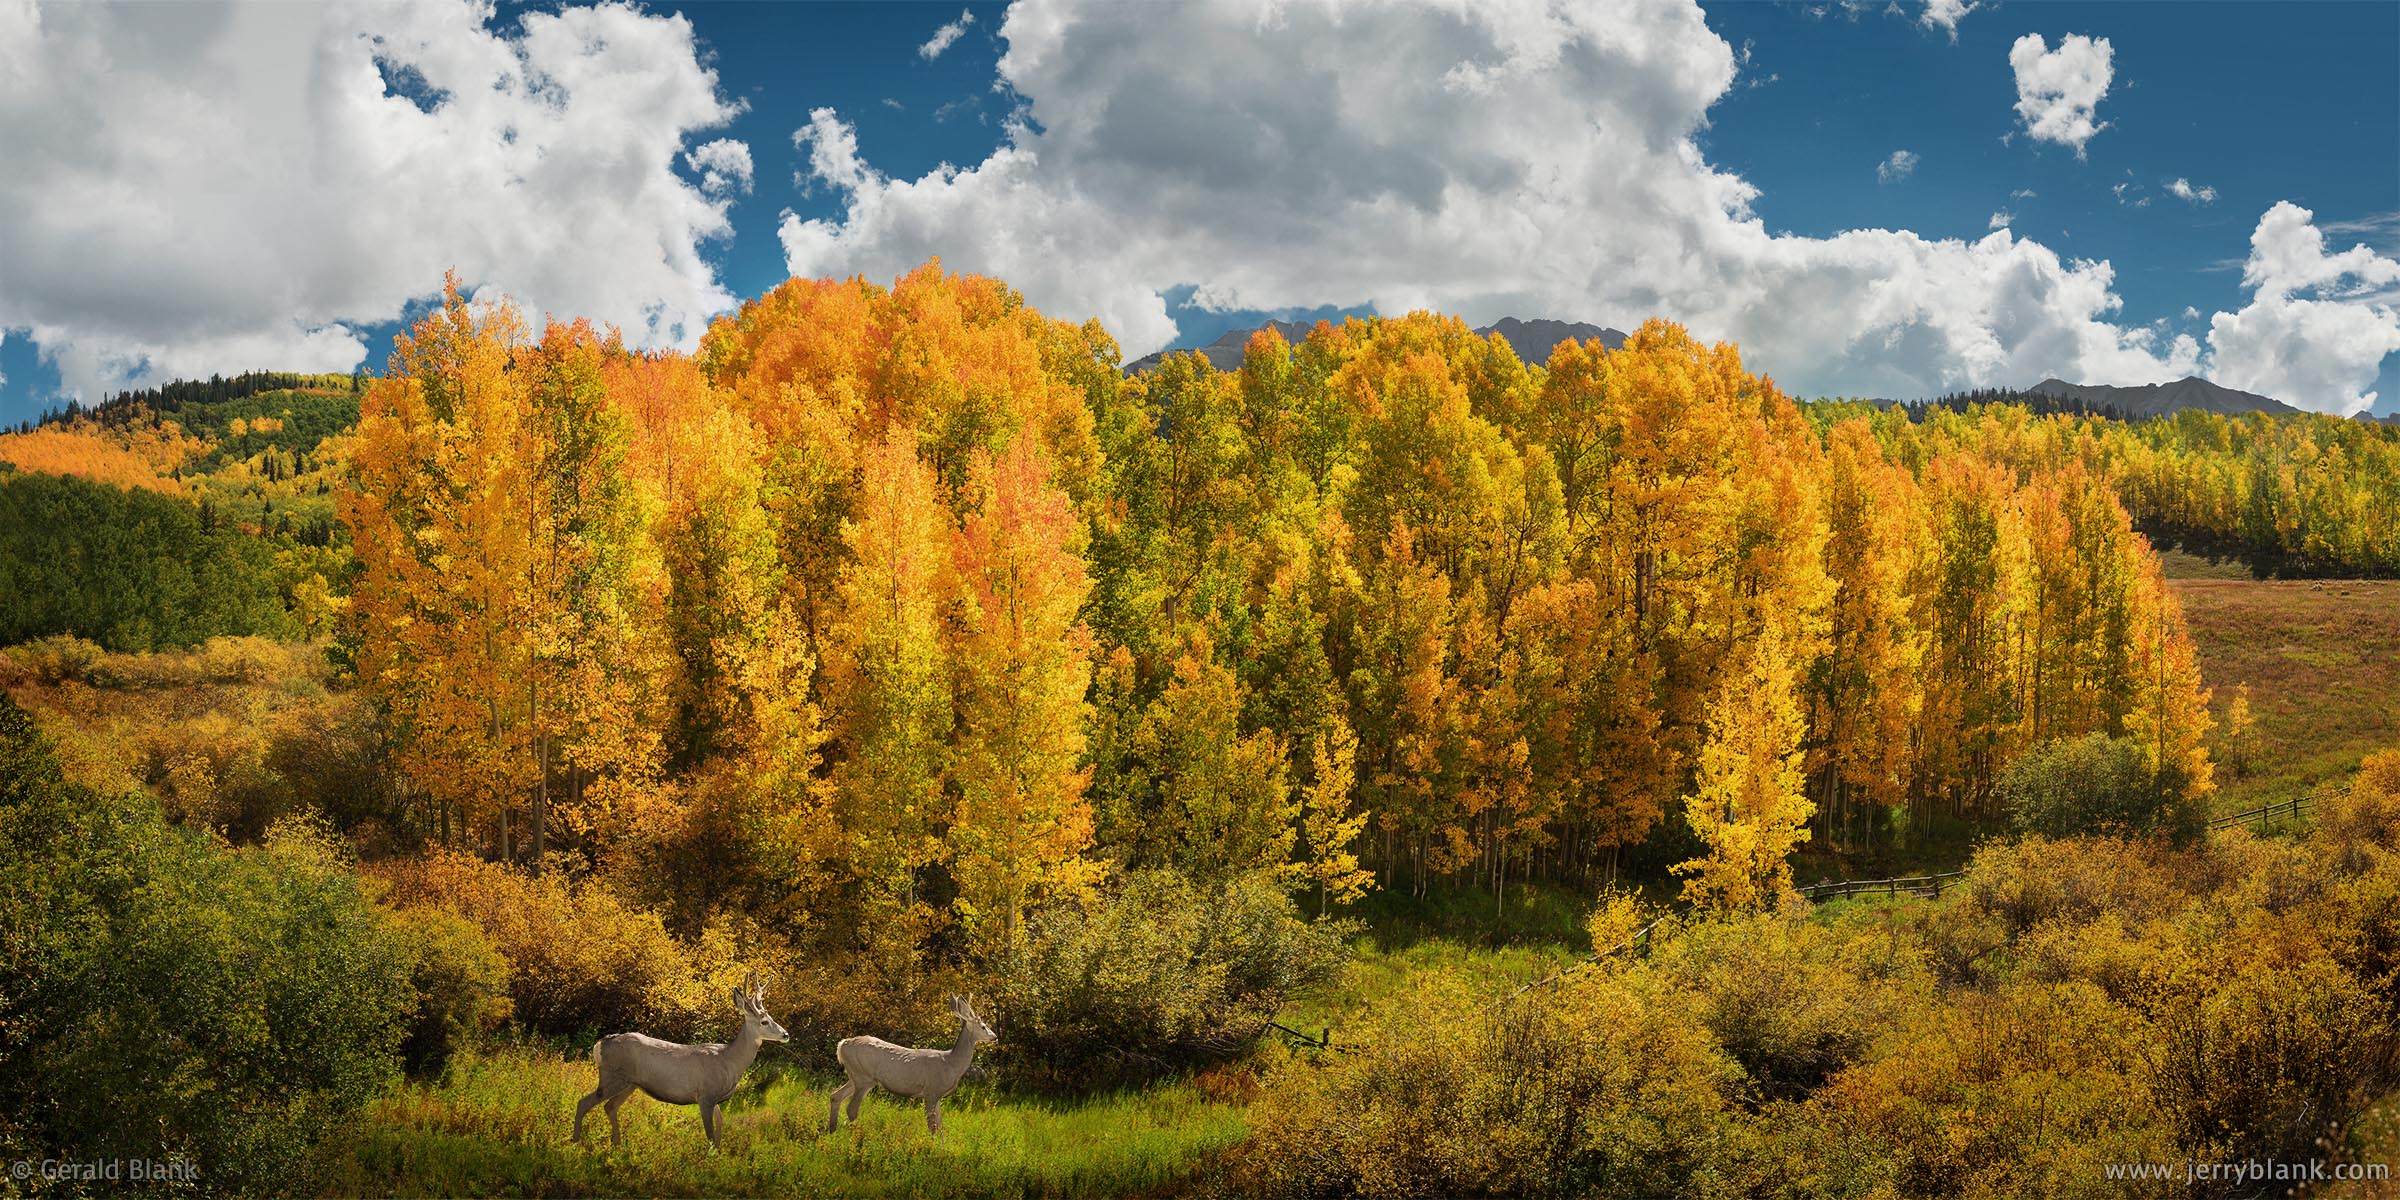 >#48148 - Two young mule deer bucks graze beneath colorful aspen trees along Colorado Hwy. 145, south of Telluride Mountain Village - photo by Jerry Blank